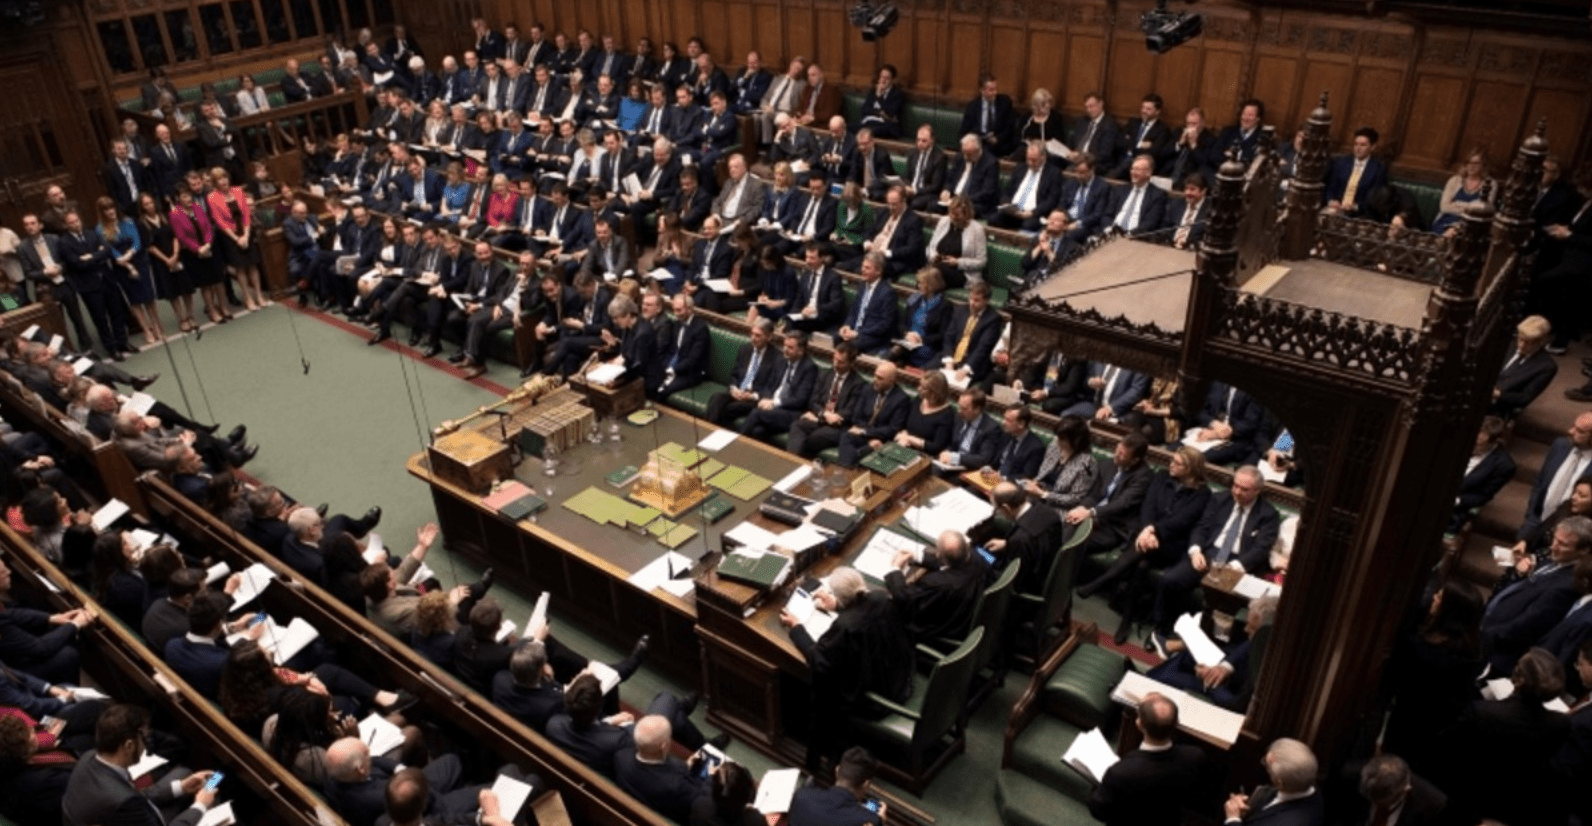 Ten years of questions and answers at the House of Commons